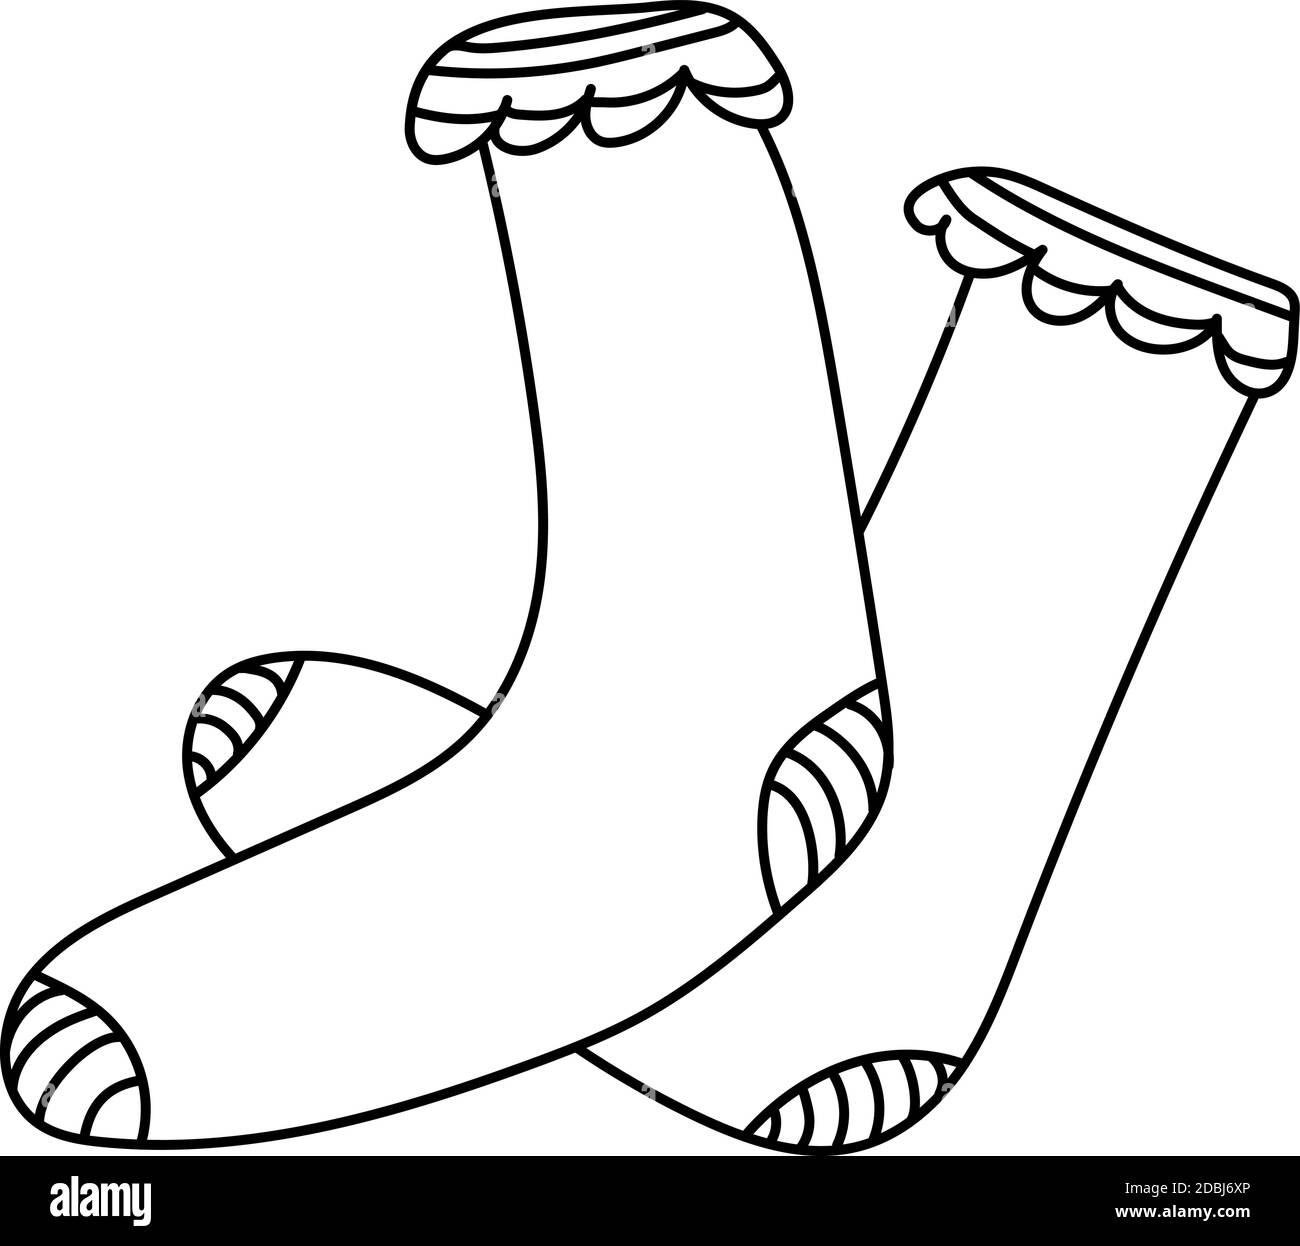 Isolated icon of hand drawn doodle warm socks. Stock Vector